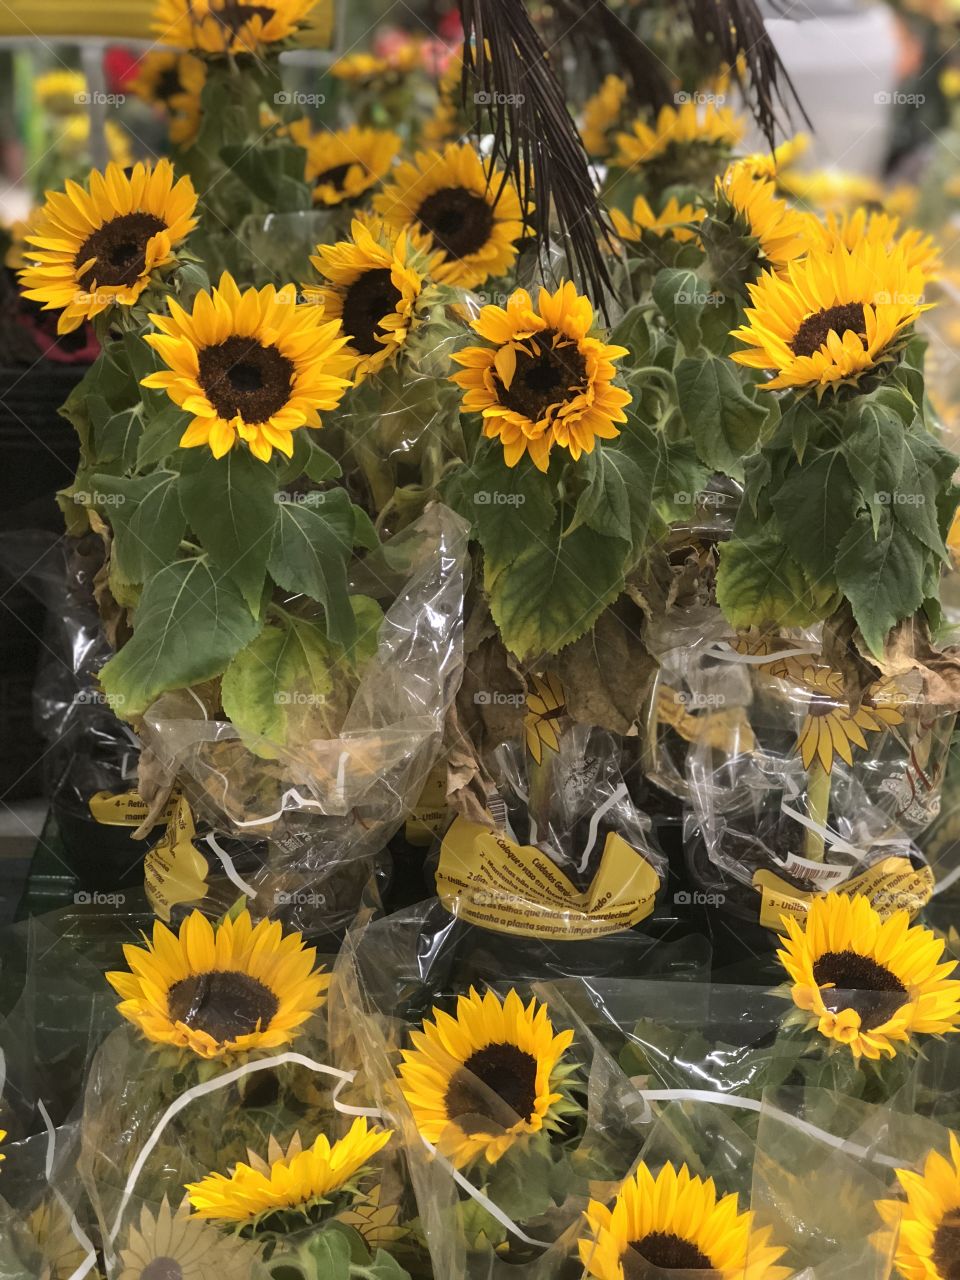 Many sunflowers on display in the supermarket